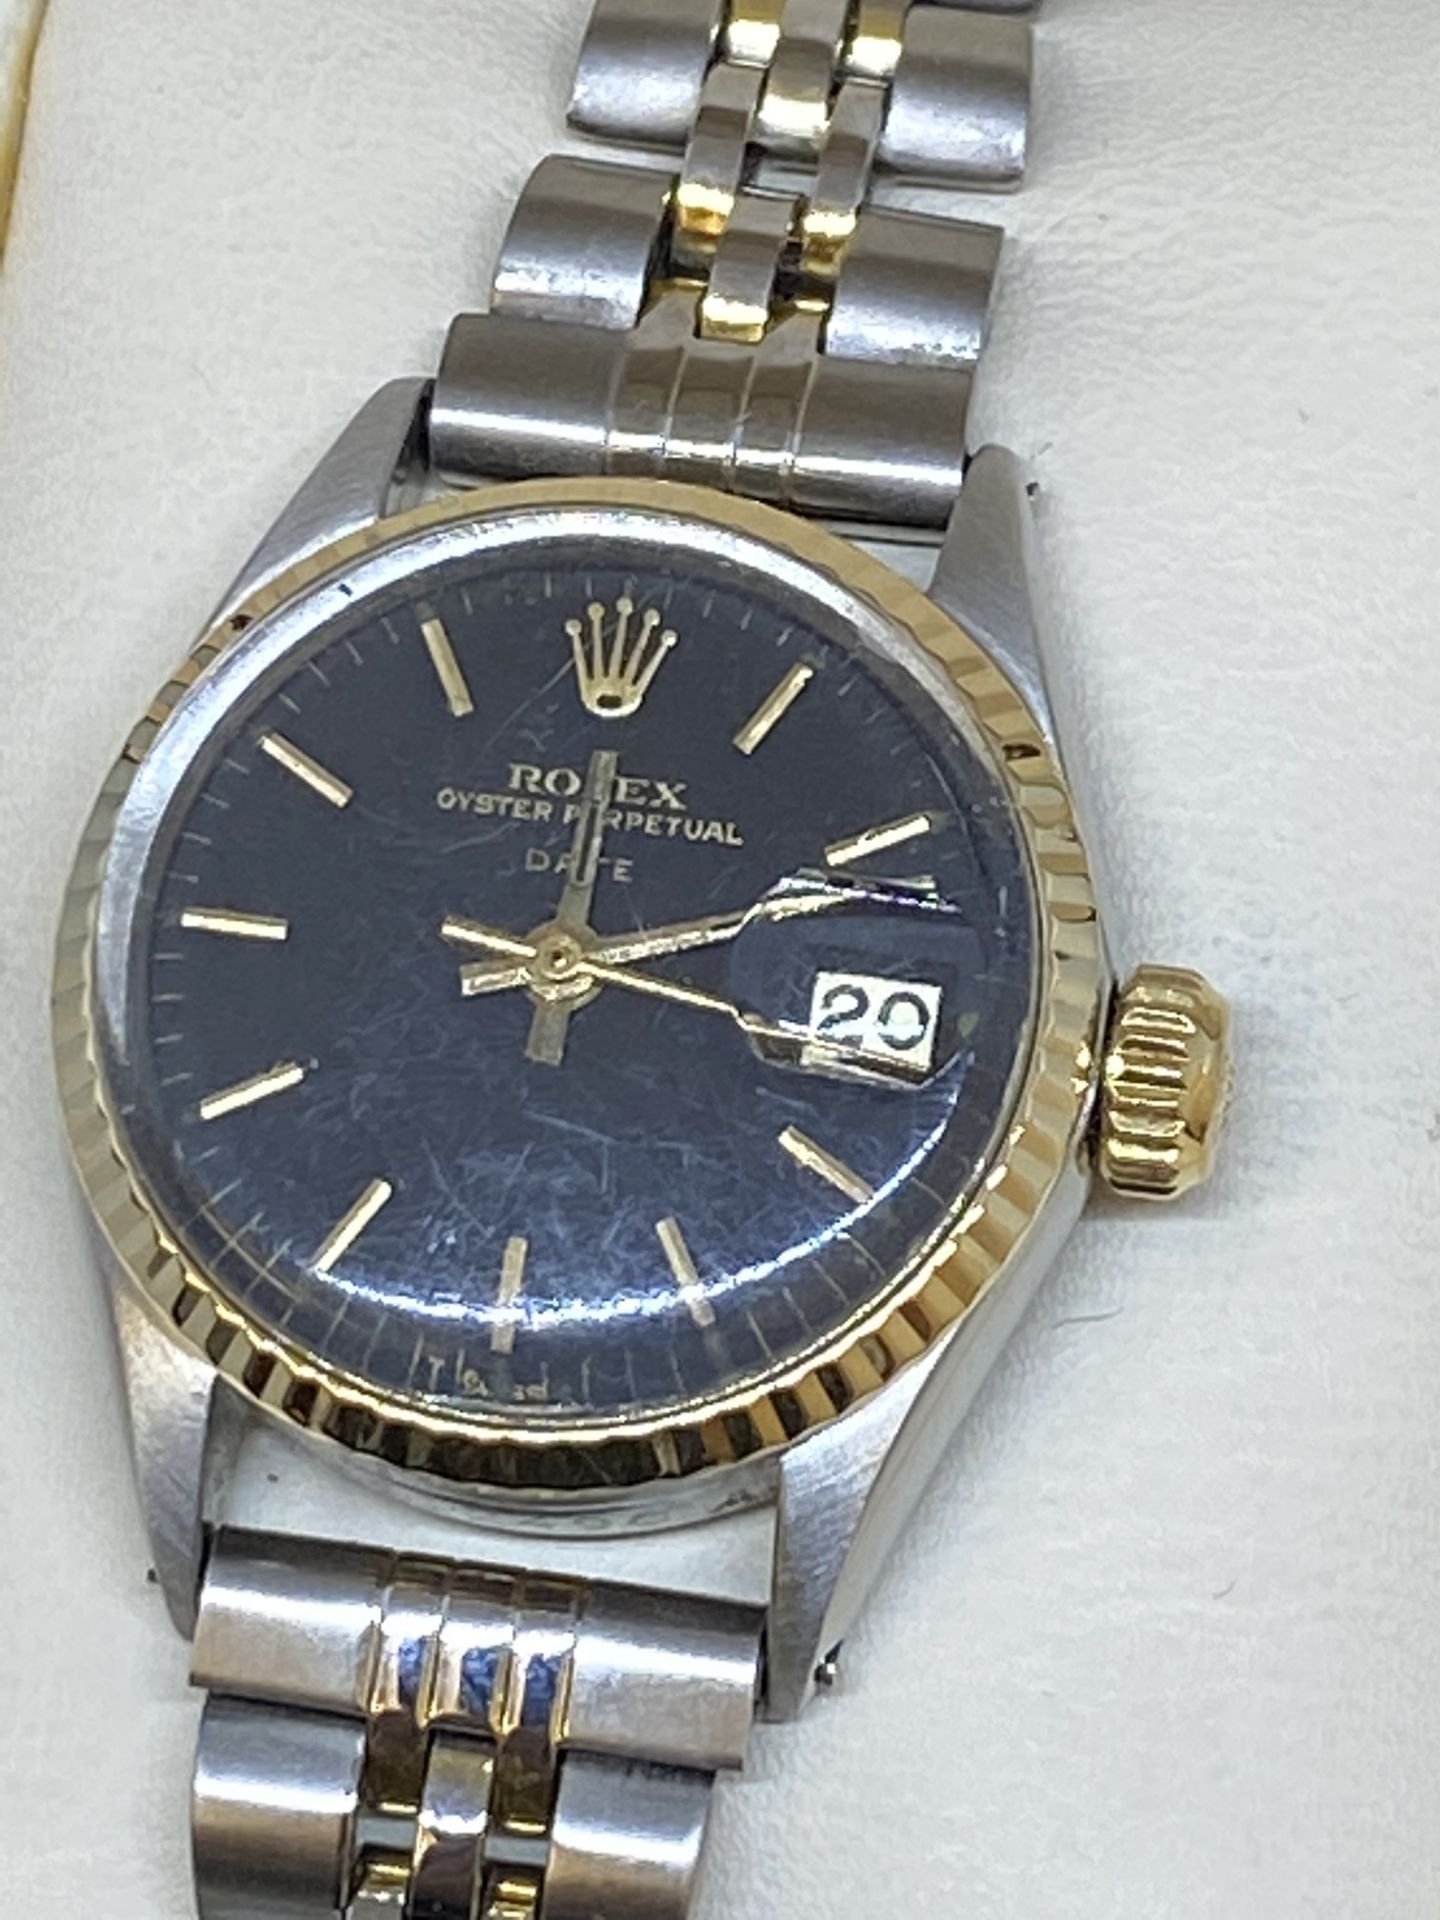 LADIES GOLD & STEEL ROLEX WATCH - NON GENUINE BRACELET FITTED - Image 4 of 10